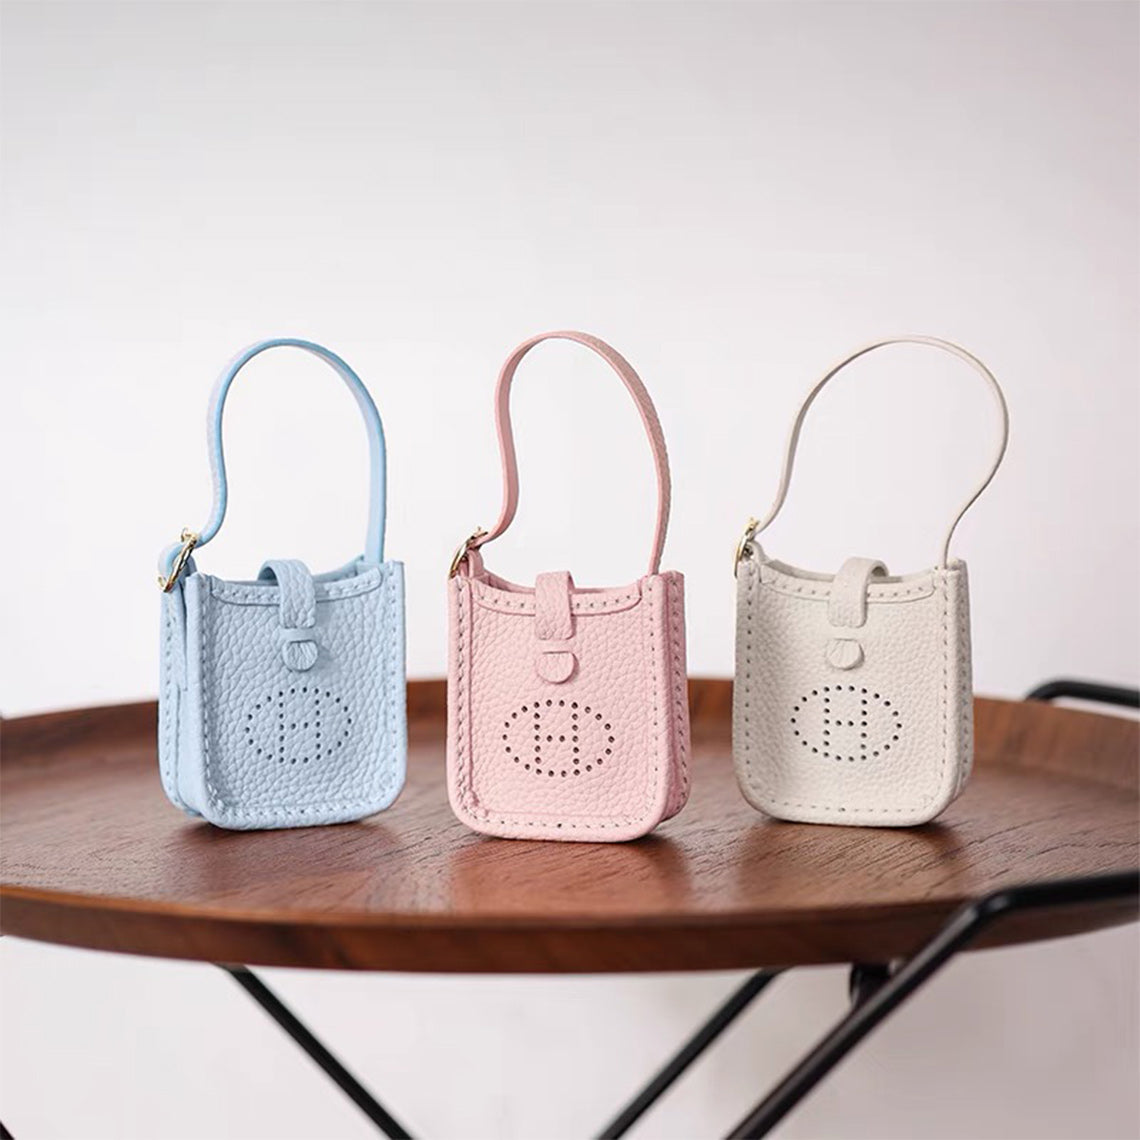 Leather Mini H Bag Charm airpods Protective case in White/Pink/Blue